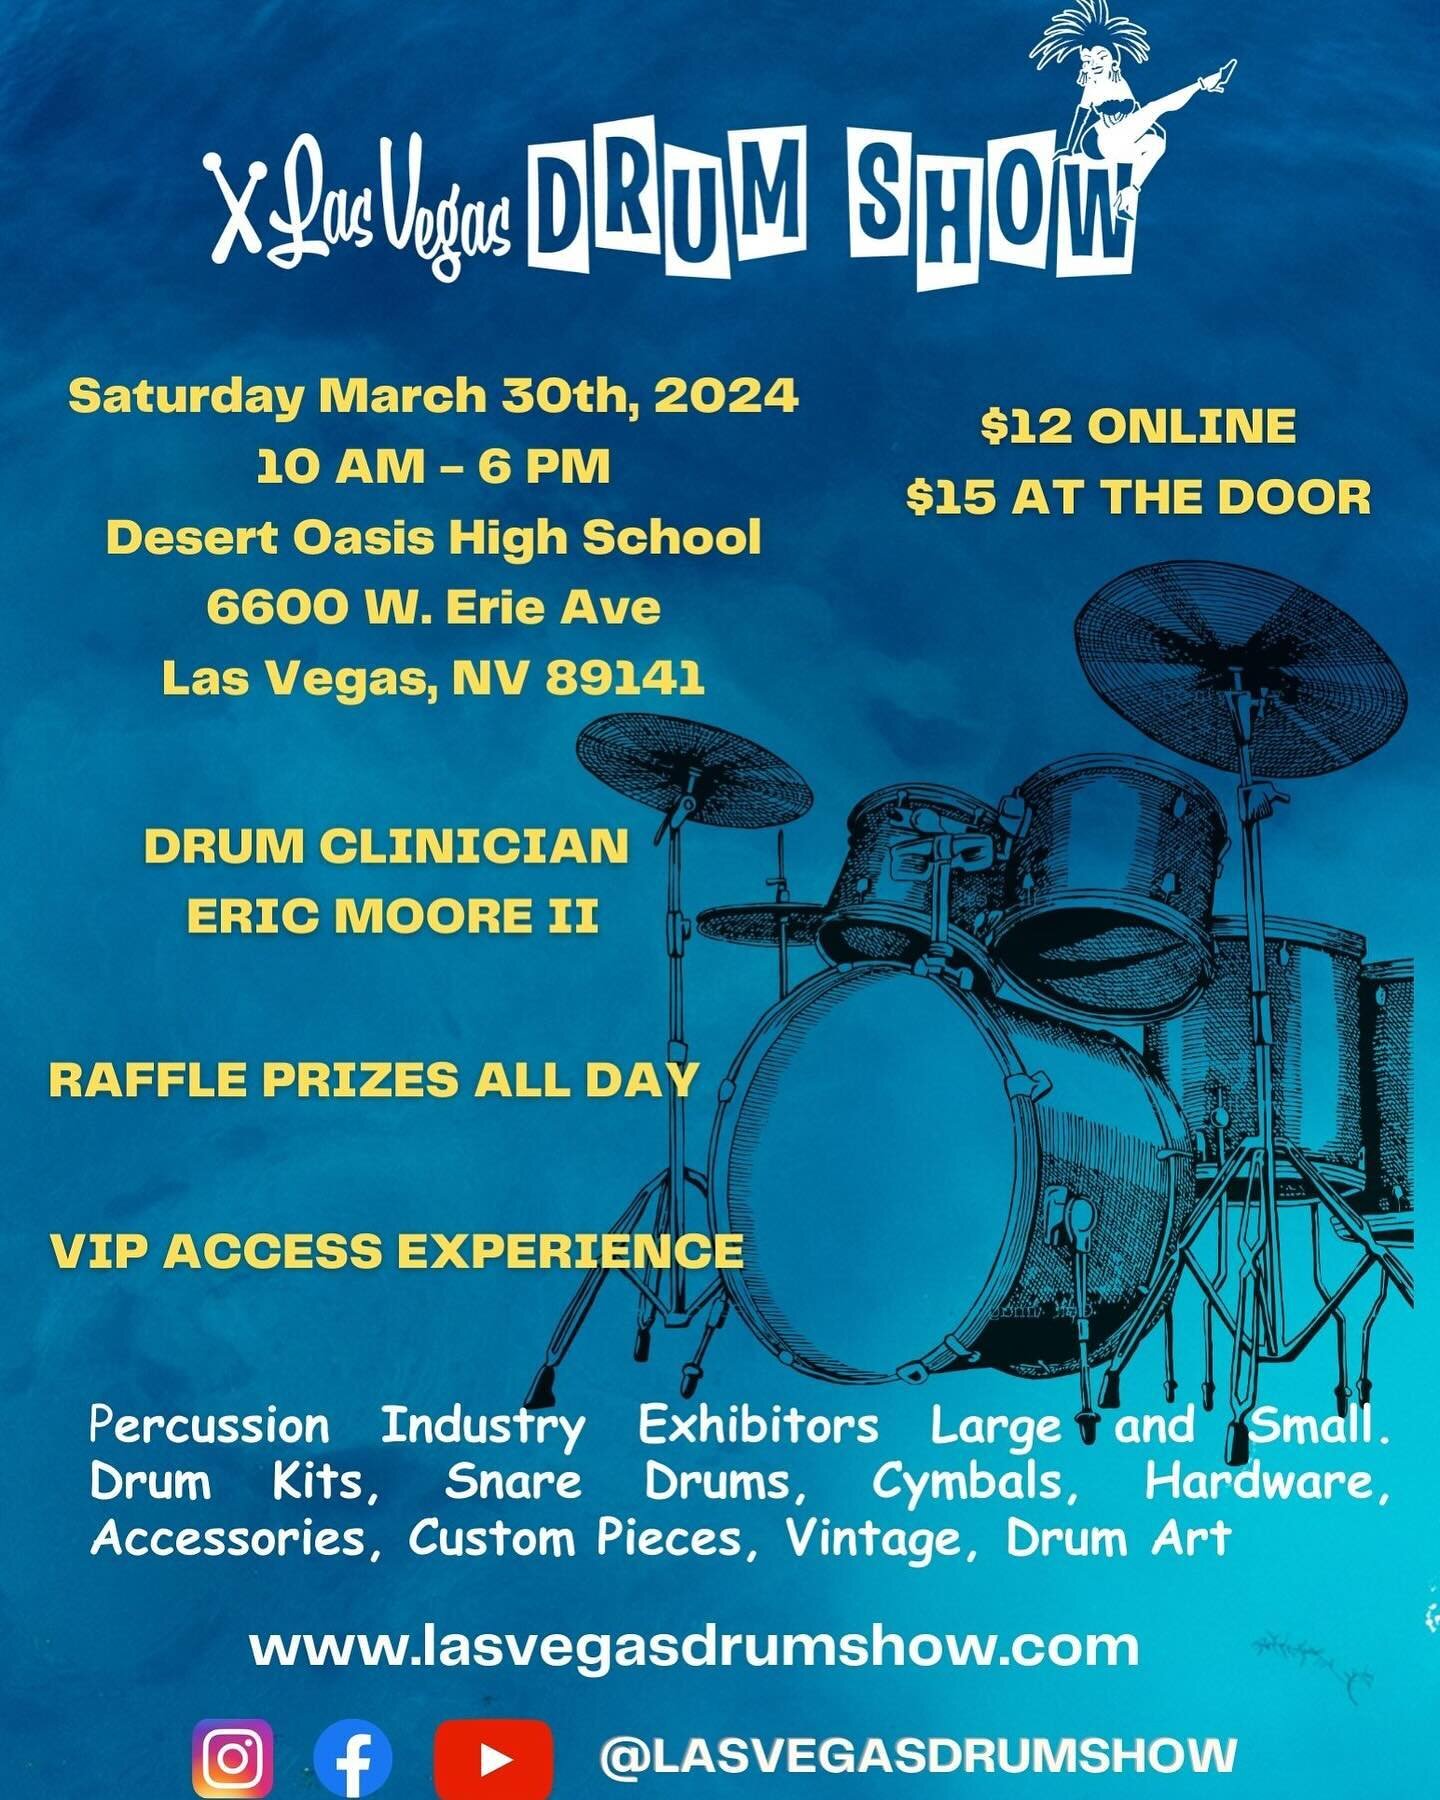 TODAY SAT MARCH 30
We&rsquo;ll be exhibiting alongside dozens of great drum brands!
- @ericmoore_ii clinic this afternoon, followed by a group drum circle
- Make sure to check out our polls in our story
- Tag us when you drop by to demo our Dynamic D